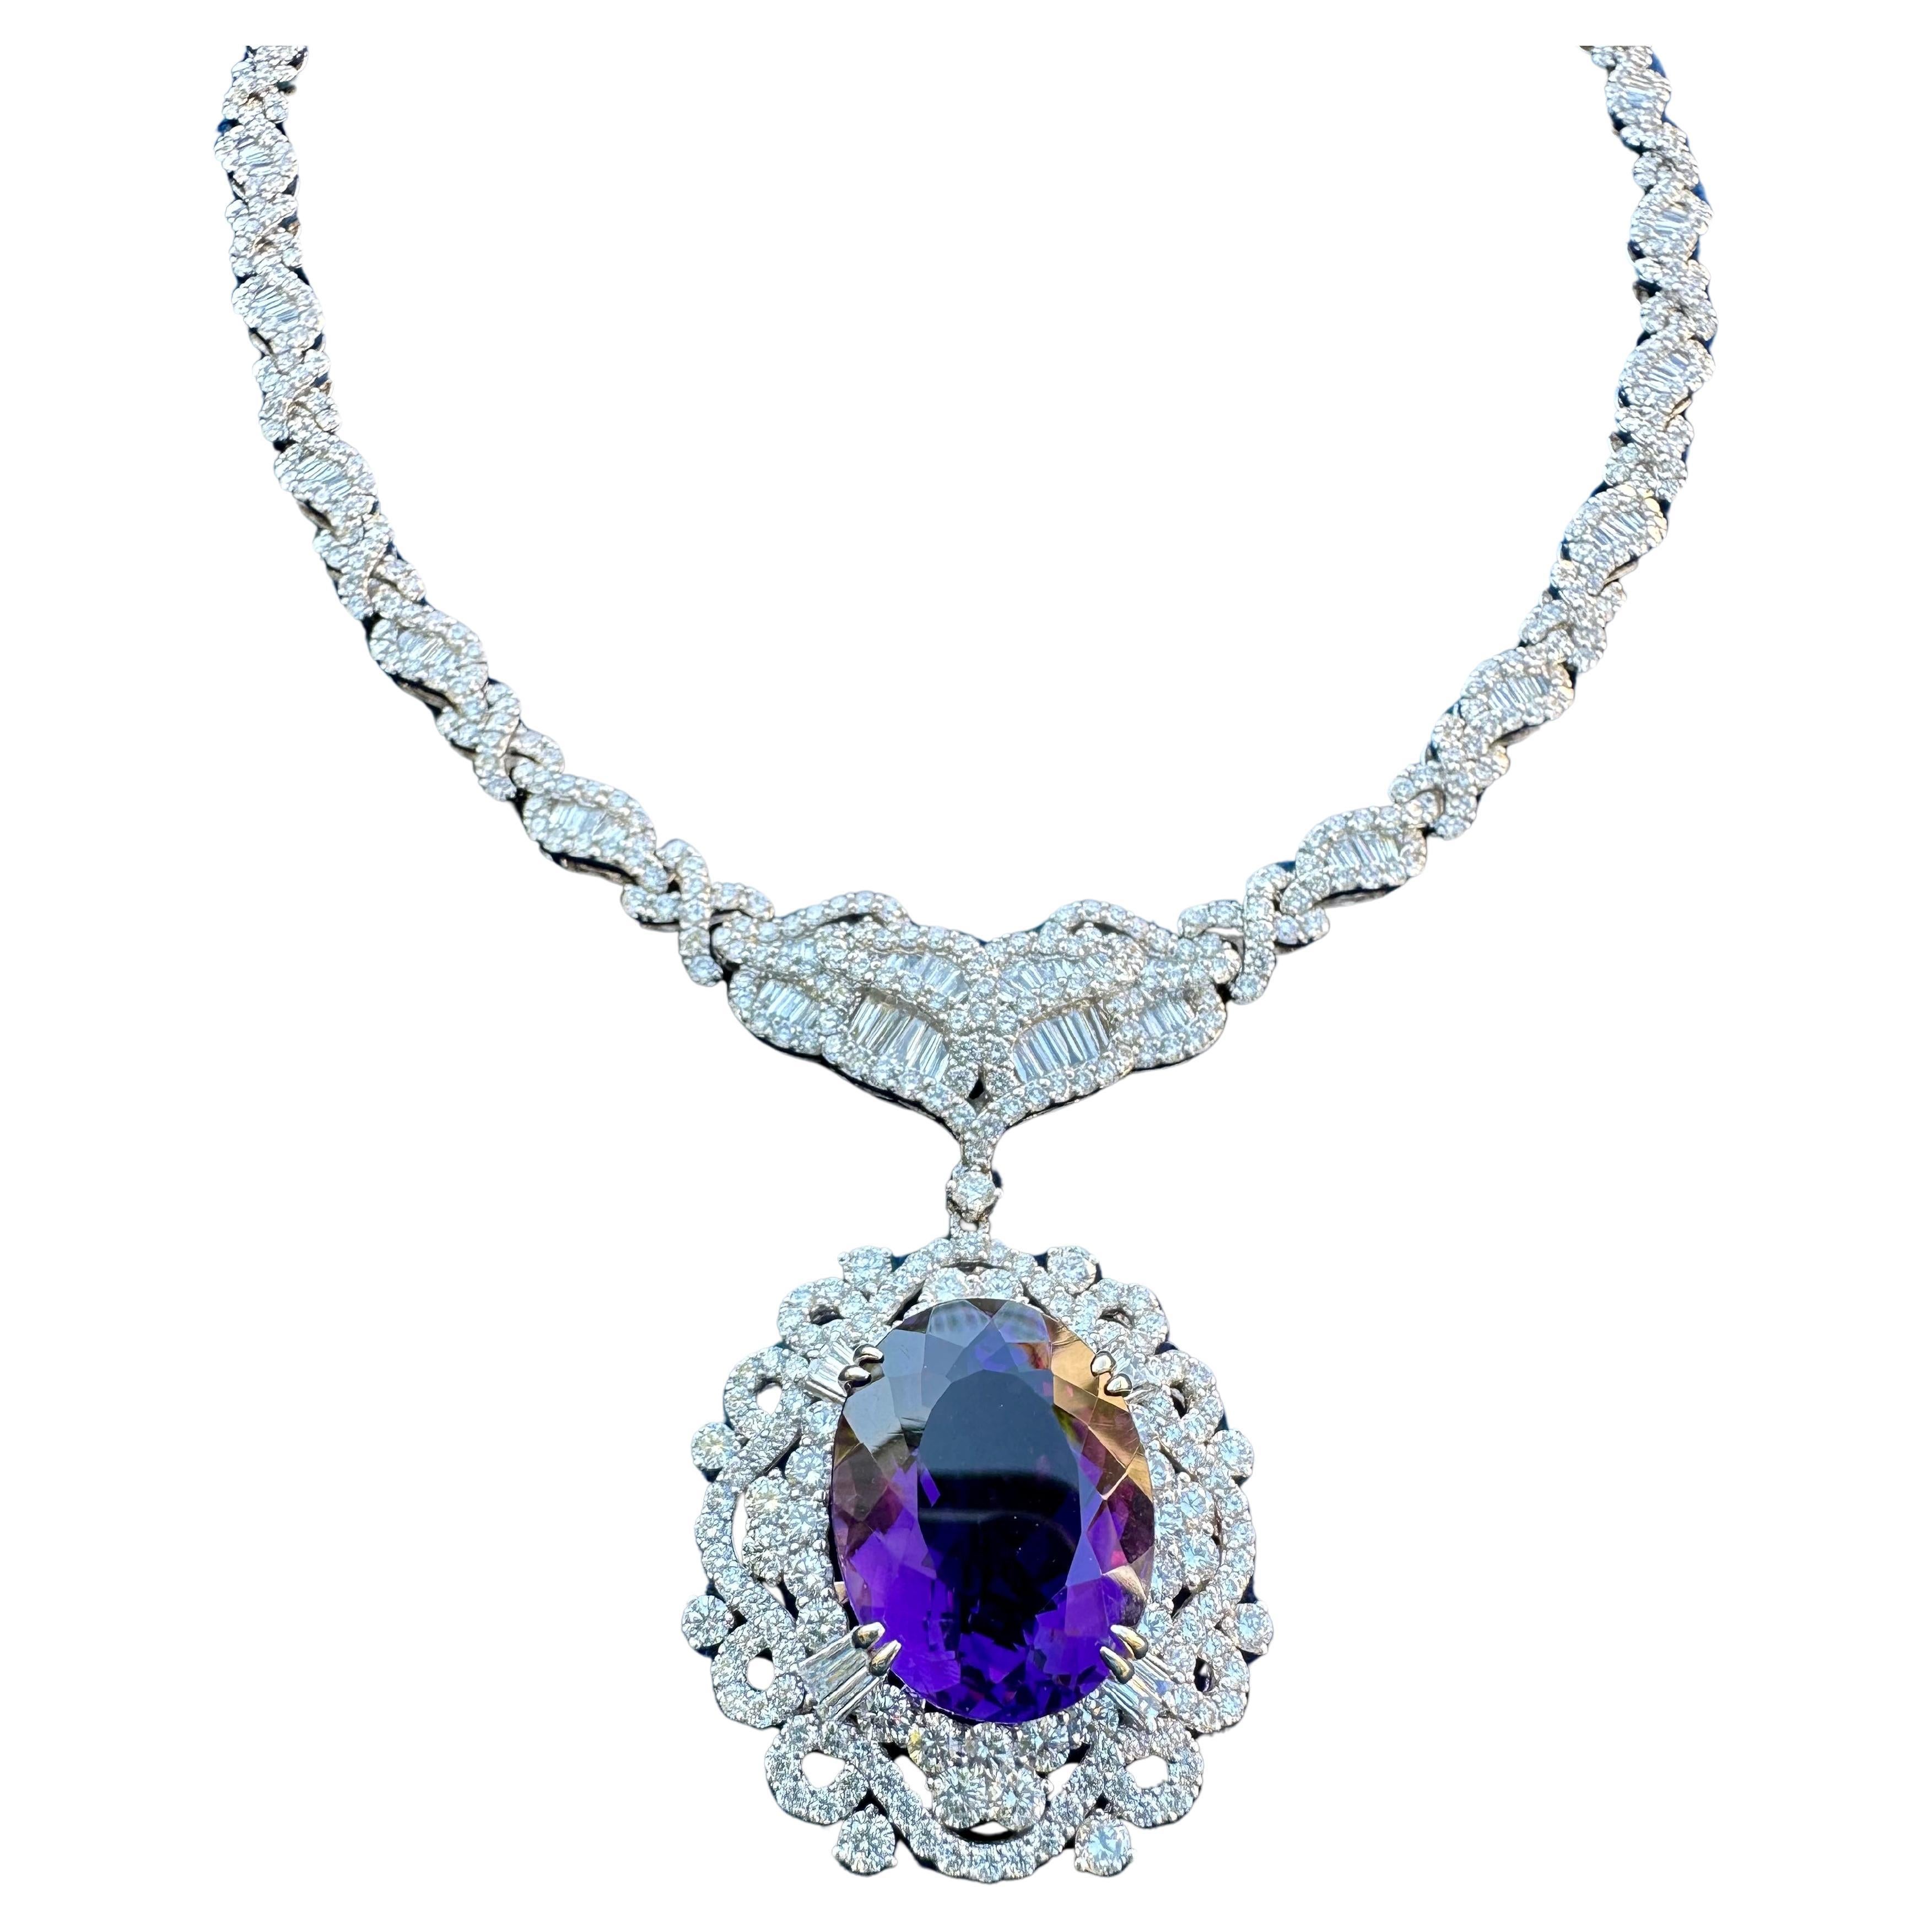 Magnificent, very majestic and opulent in real life, huge natural intense purple Brazilian Amethyst and diamond necklace is prong set in 18 karat white gold and has a combined total weight of approximately 52.10 carats.

Necklace features a 19.10